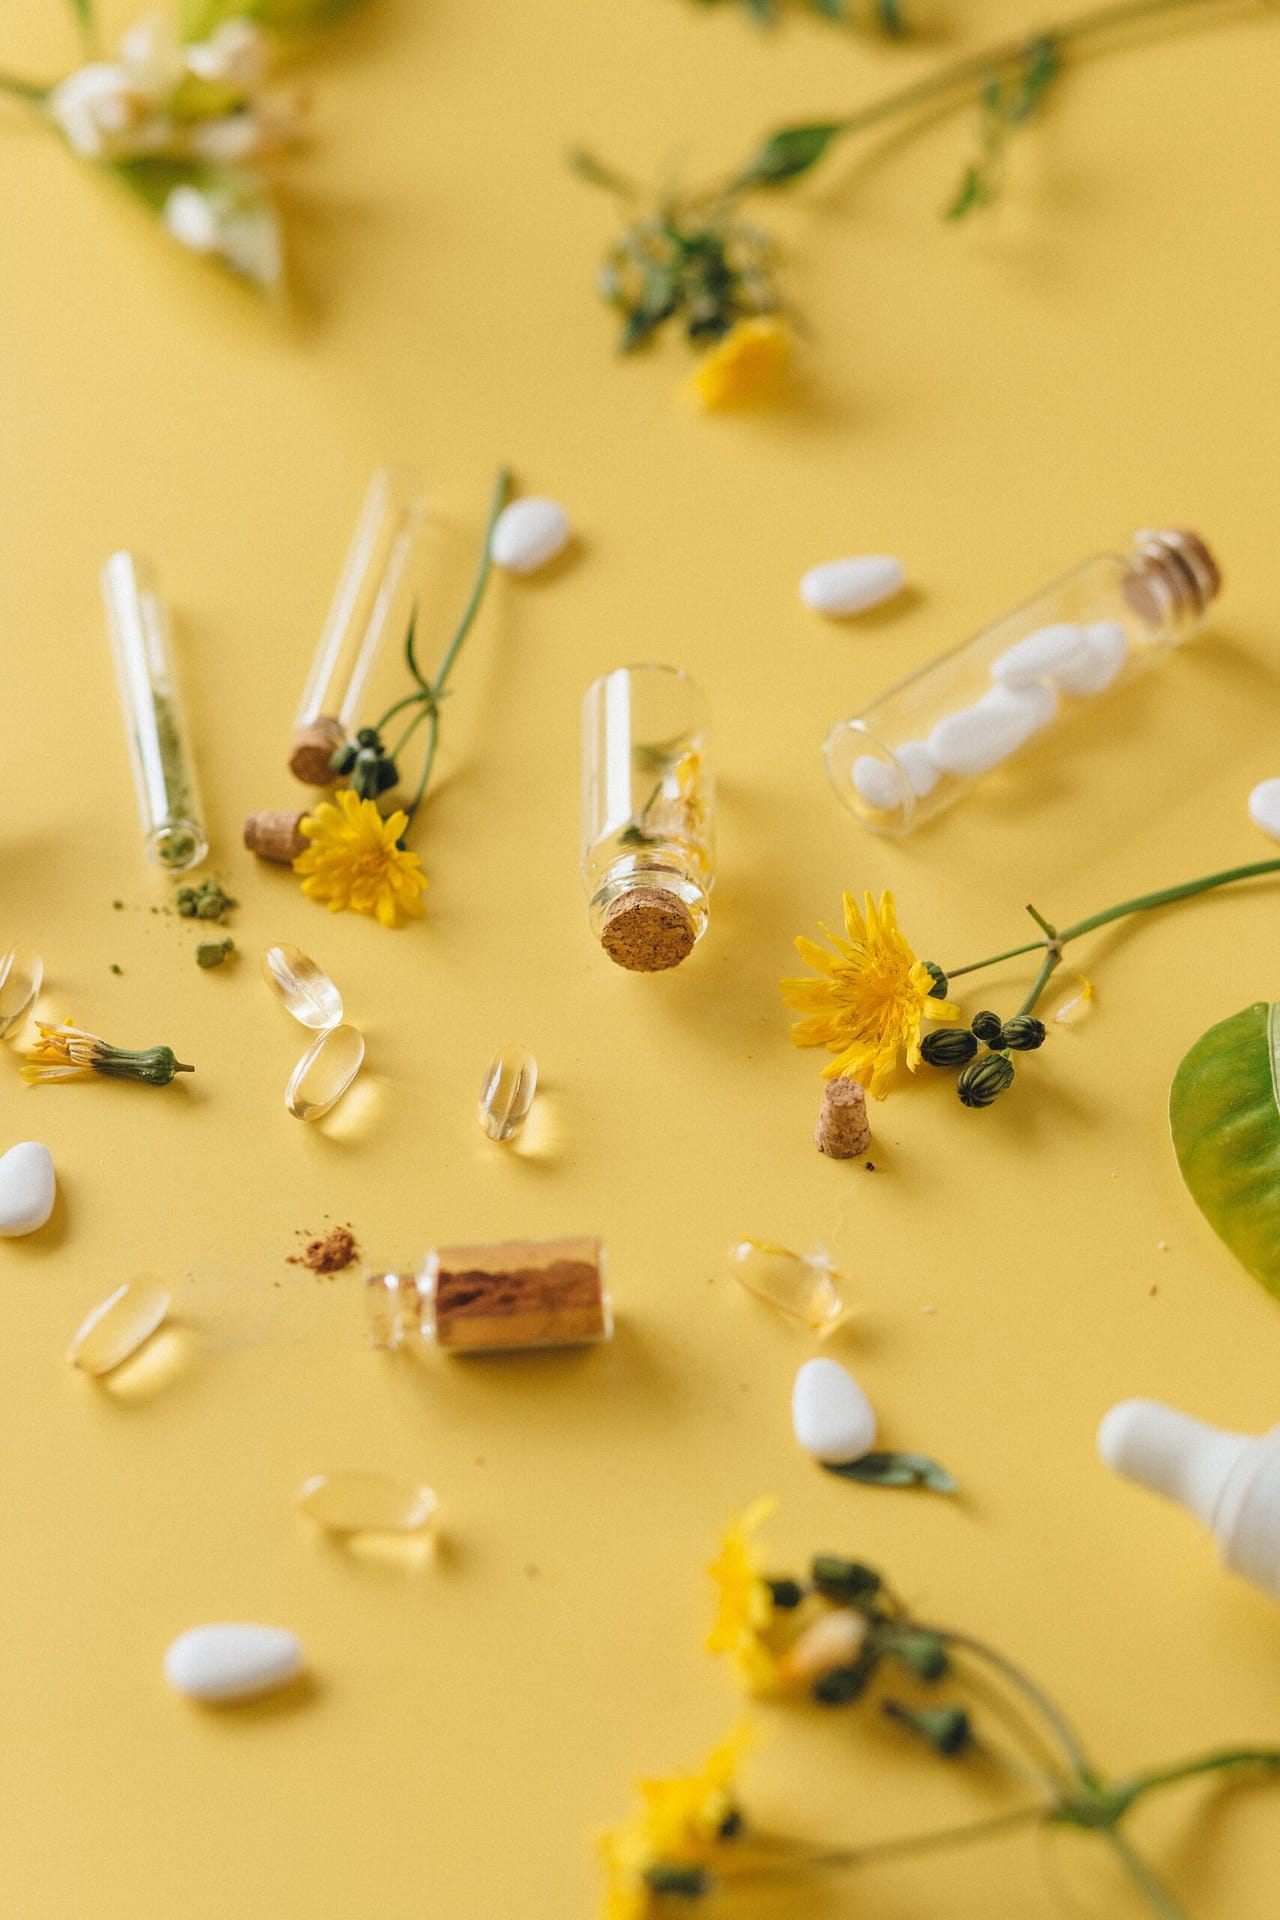 tiny bottles and pillows on a yellow background with white flowers